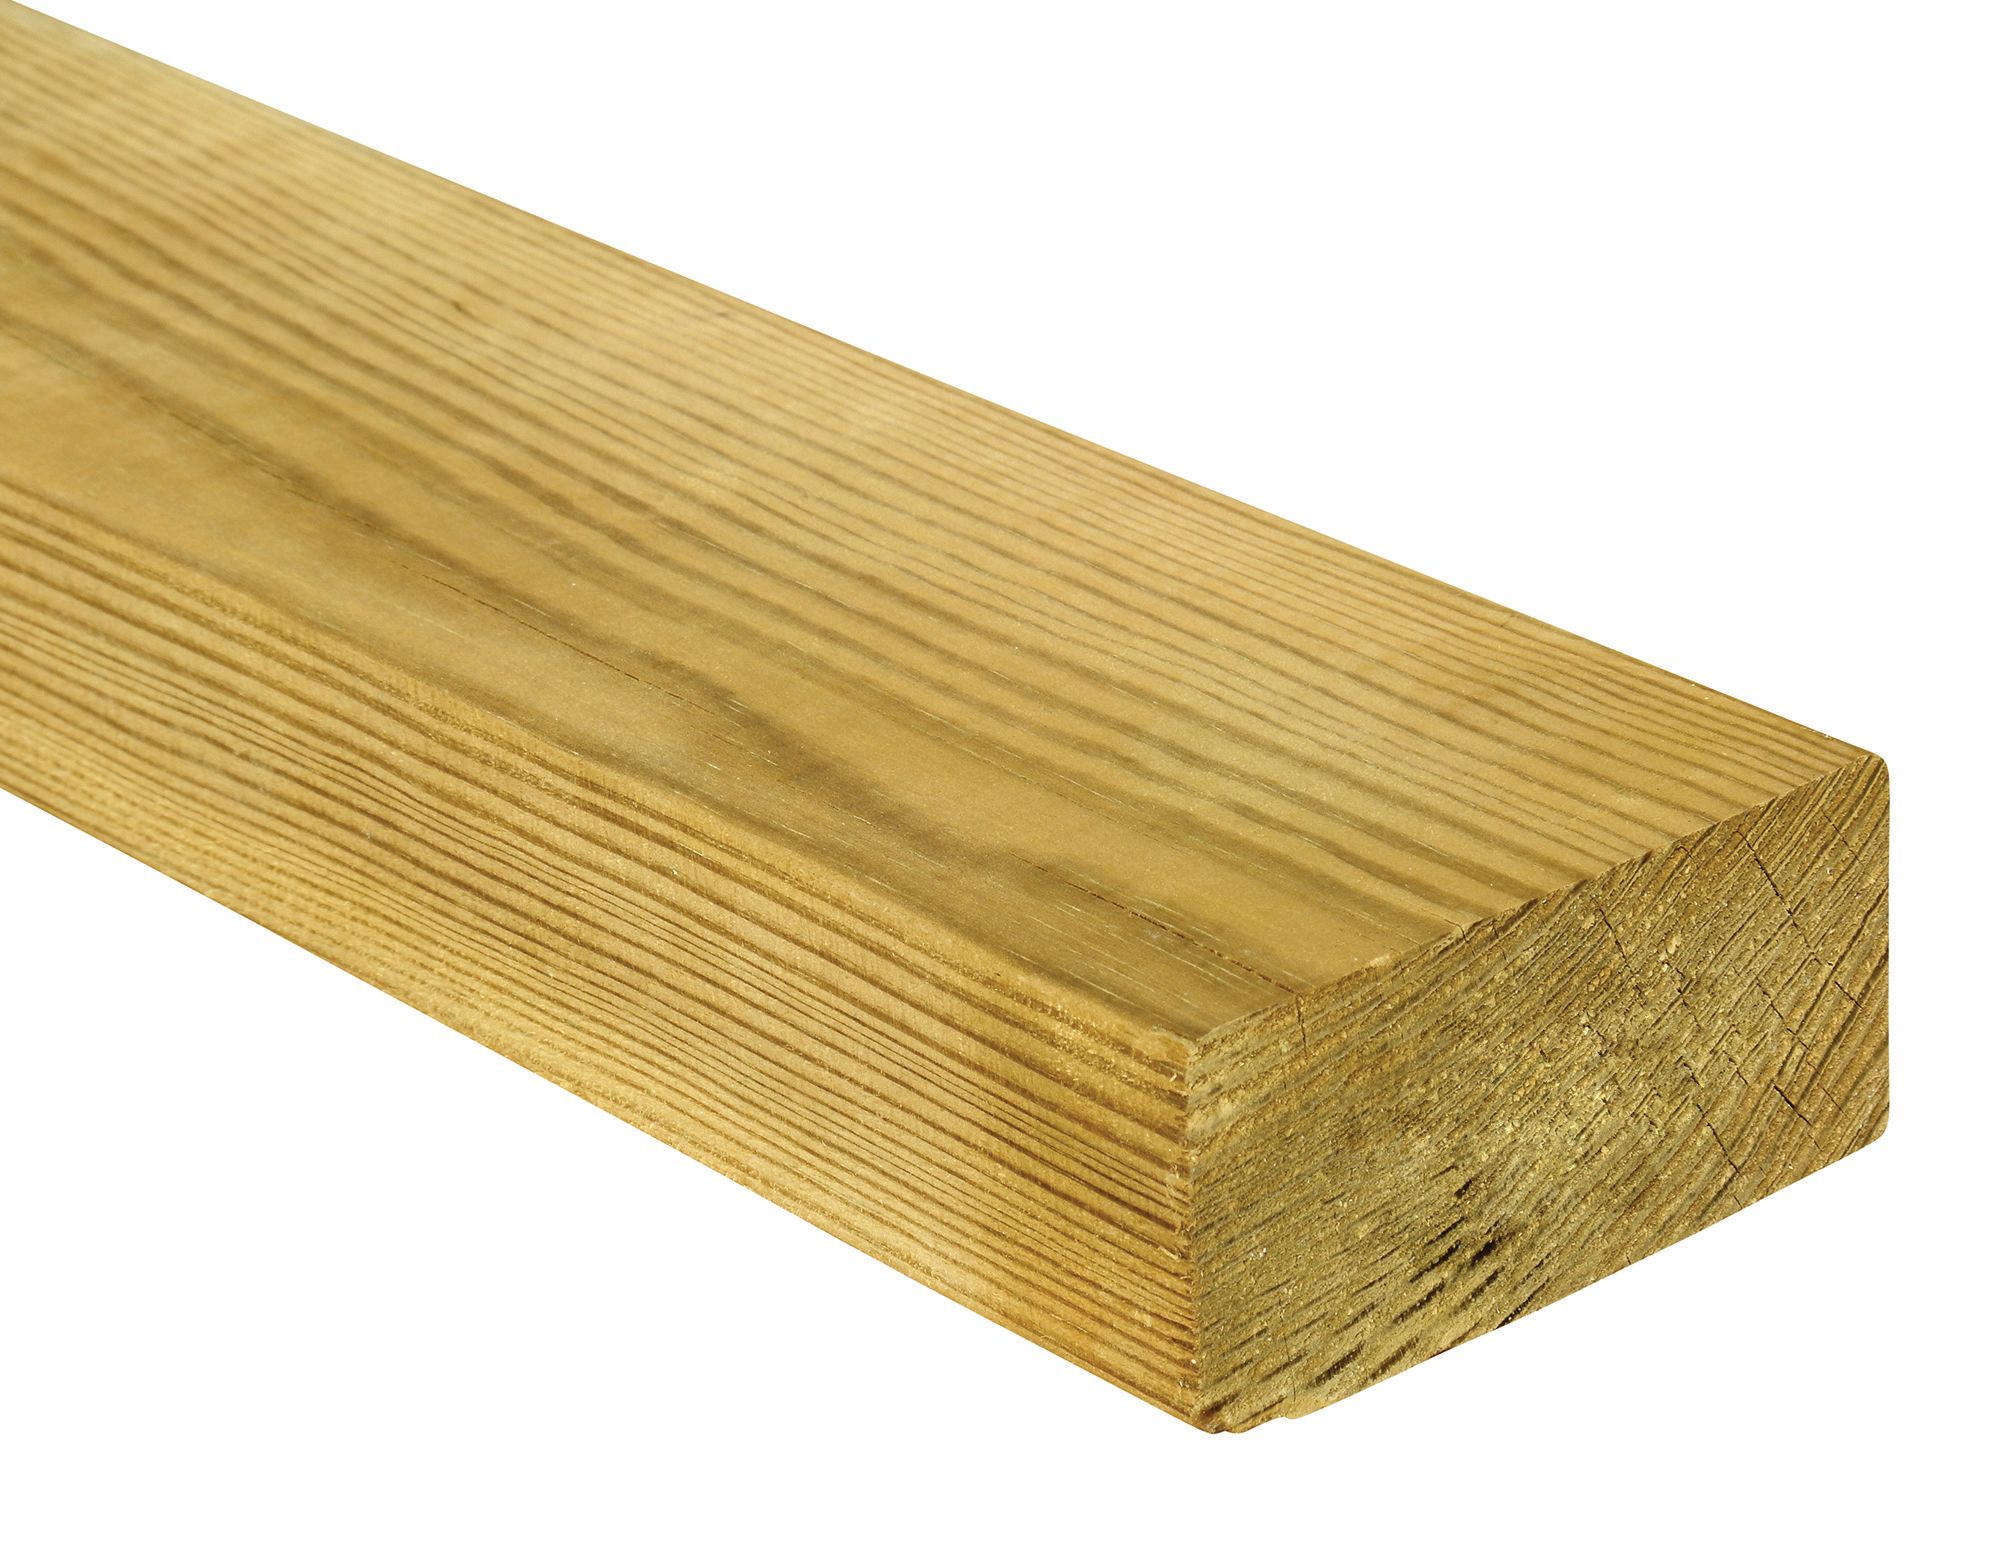 Image of Wickes Kiln Dried Yellow Pressure Treated C16 Timber Spruce - 45x95x2400mm